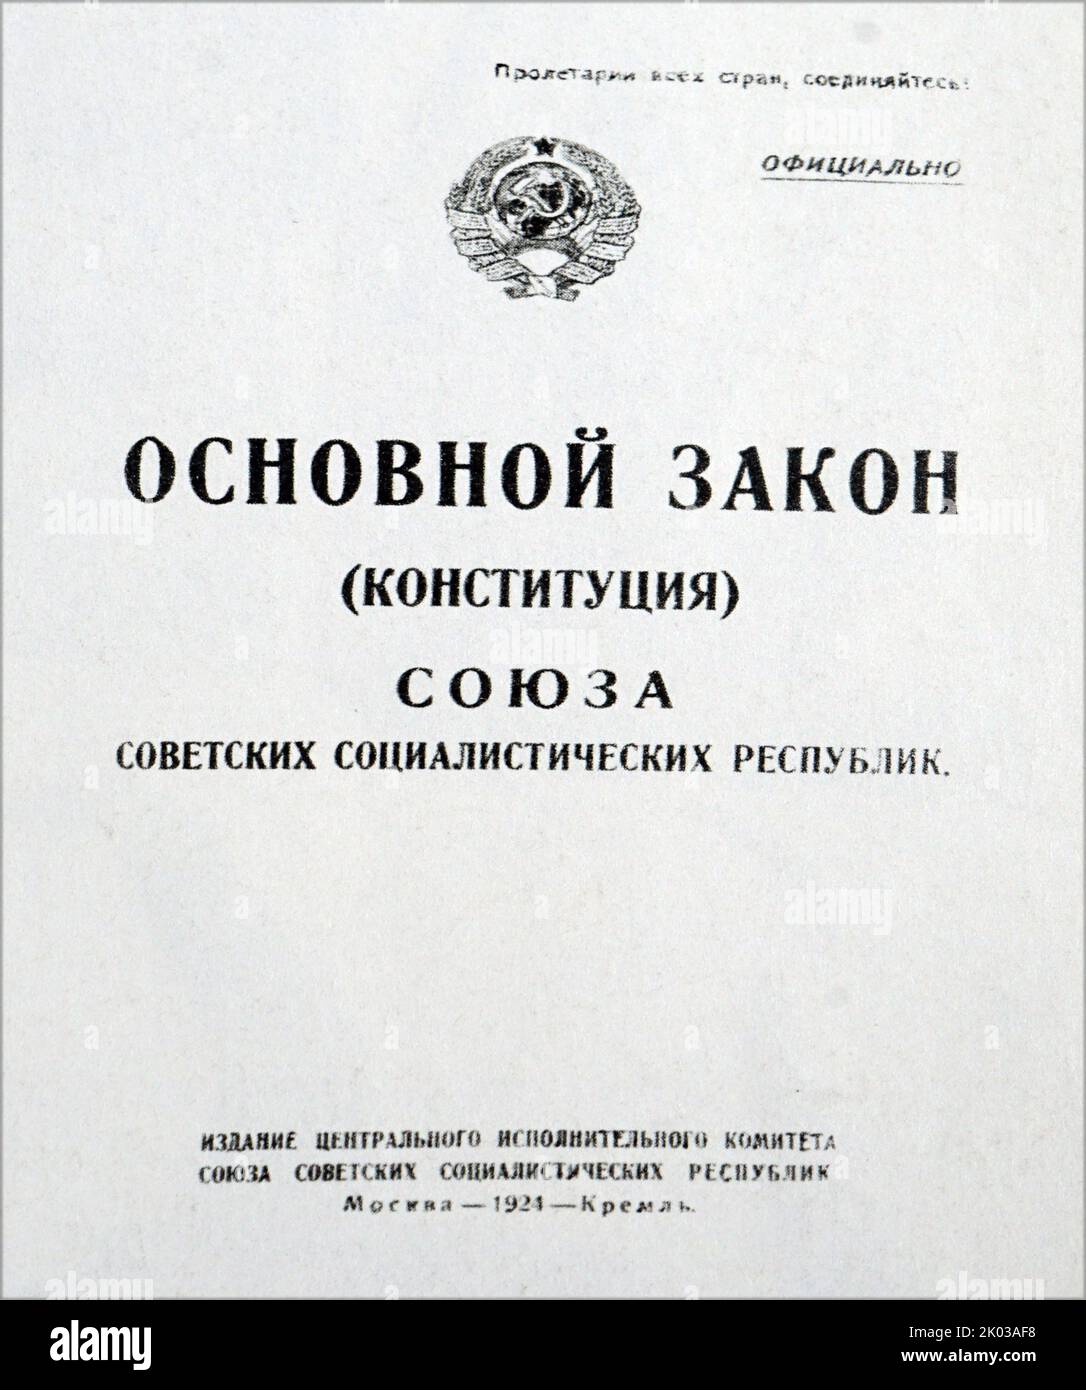 The Basic Law (Constitution) of the USSR. Published by the USSR Central Executive Committee. Moscow, 1924, the Kremlin. Stock Photo